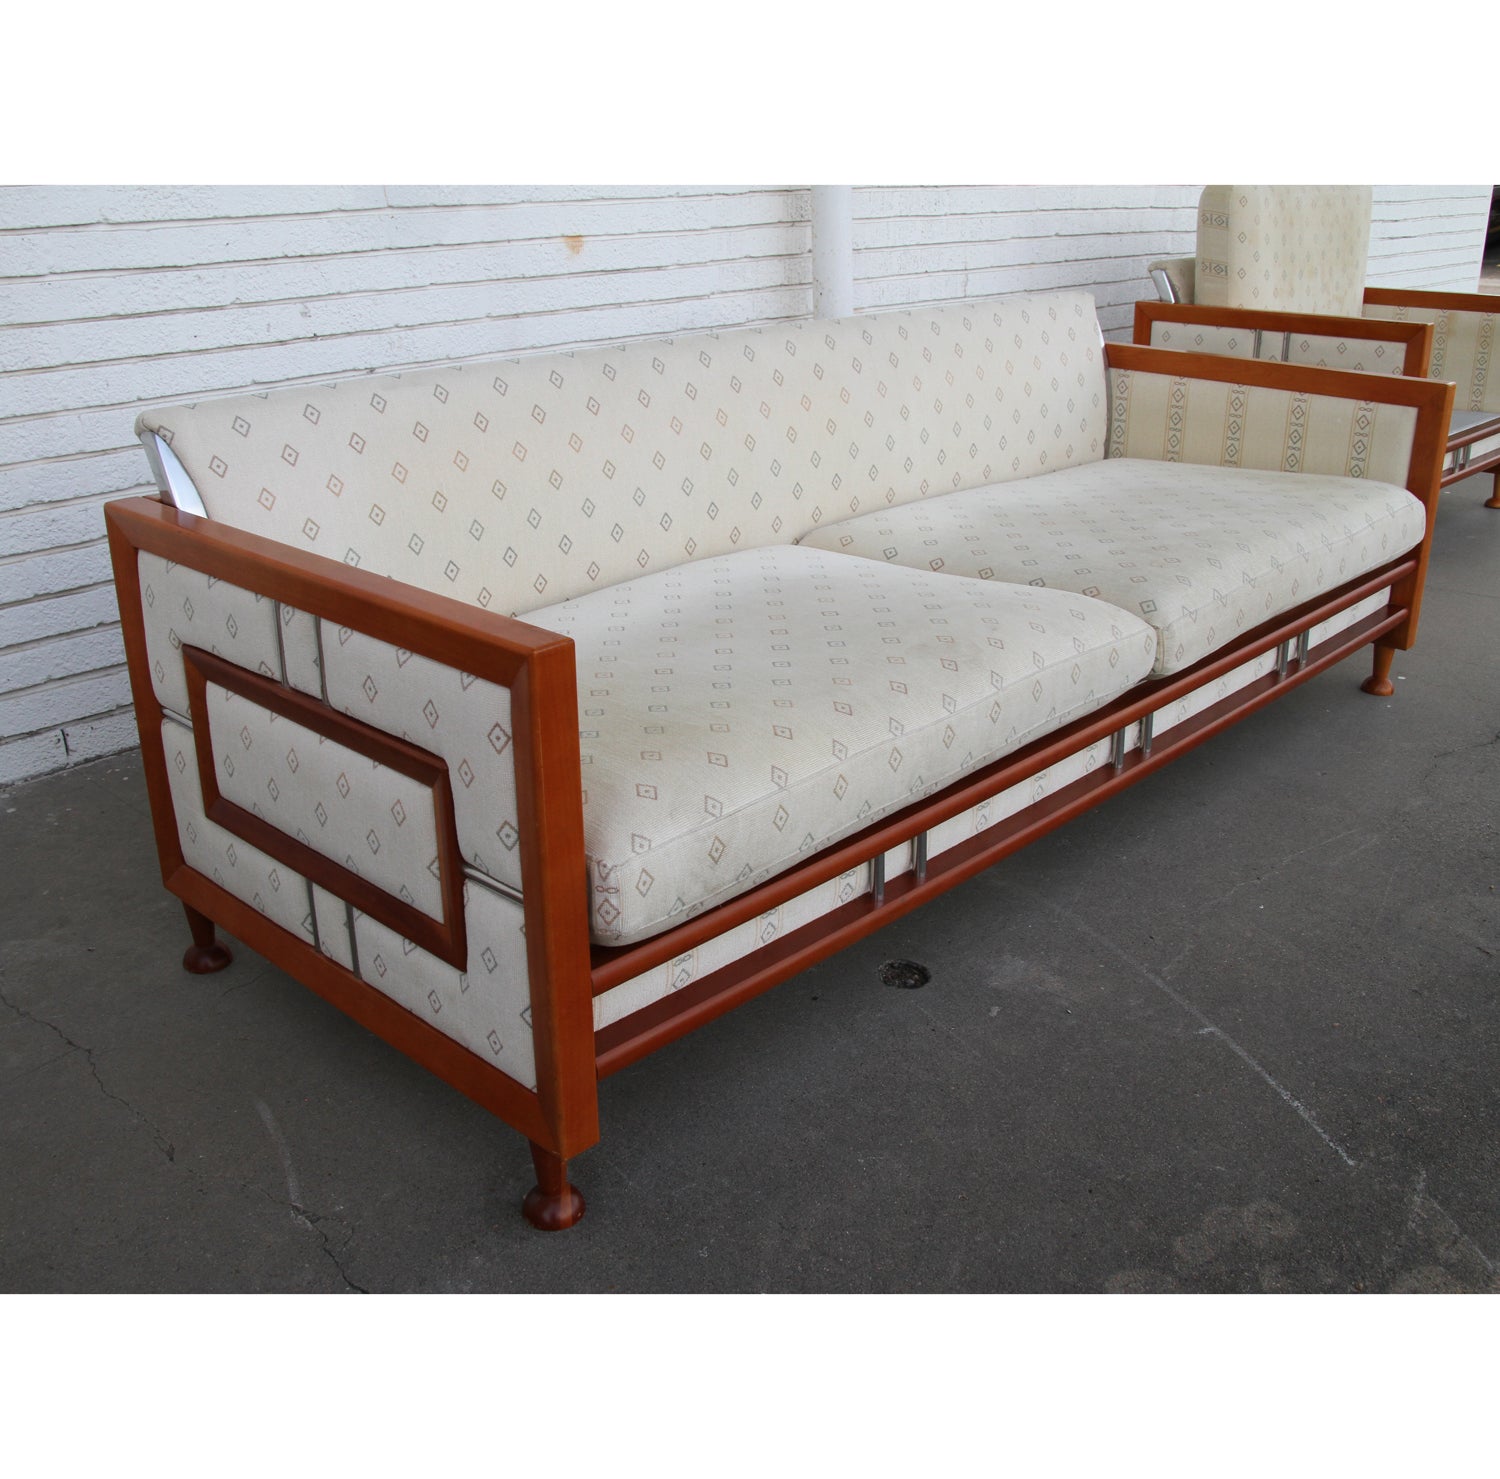 Unique custom teak sofa from Spain.

Interesting sofa with inlay teak and chrome on sides and base. We have matching lounge chairs available as well.

Reupholstery recommended.